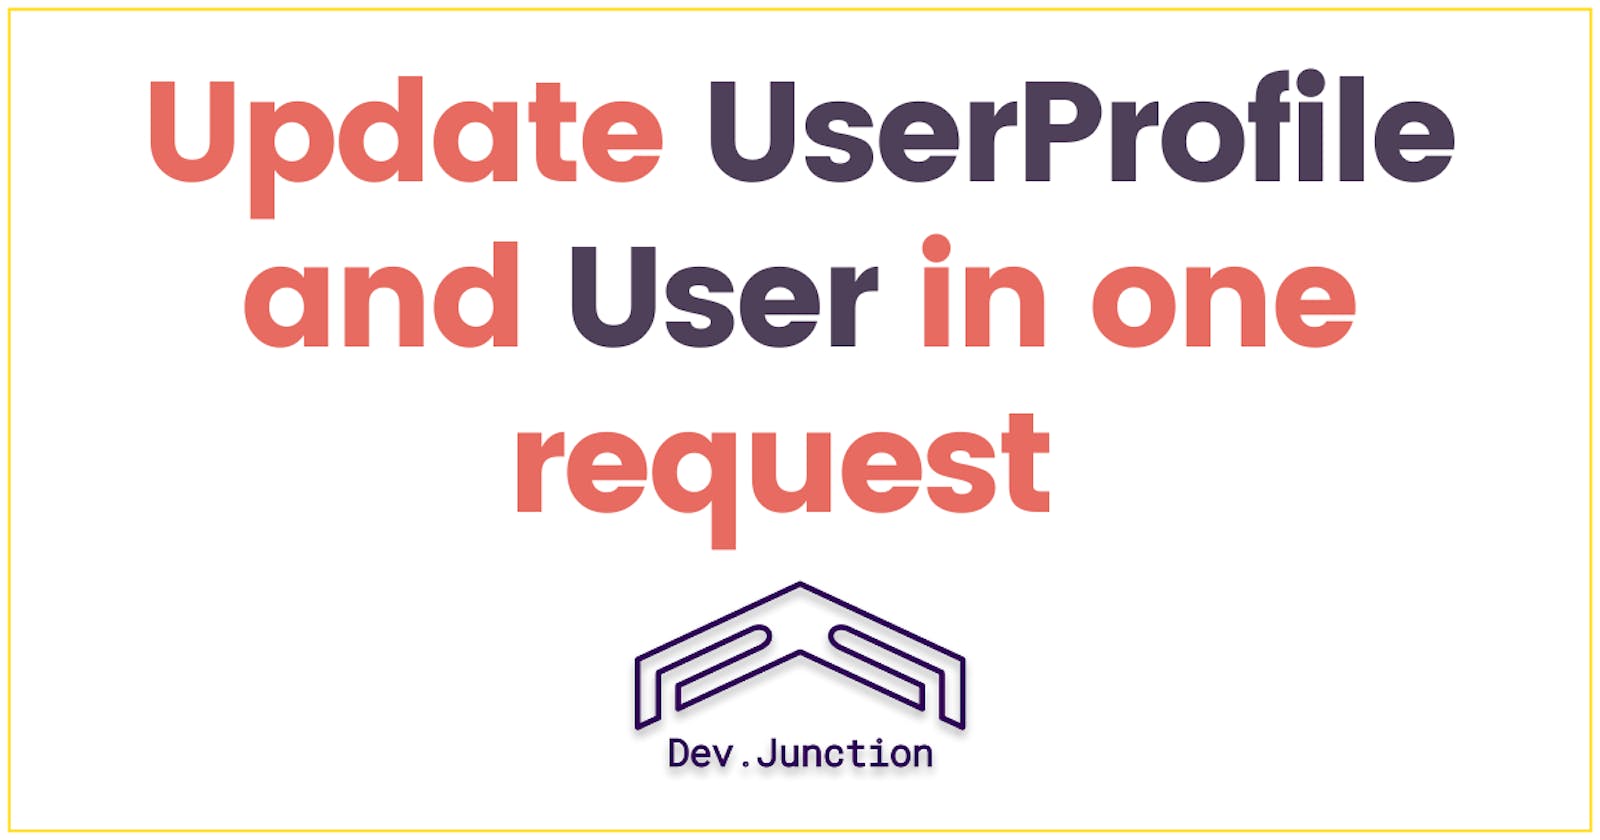 How to update User Profile and User in one request in Django Rest Framework?